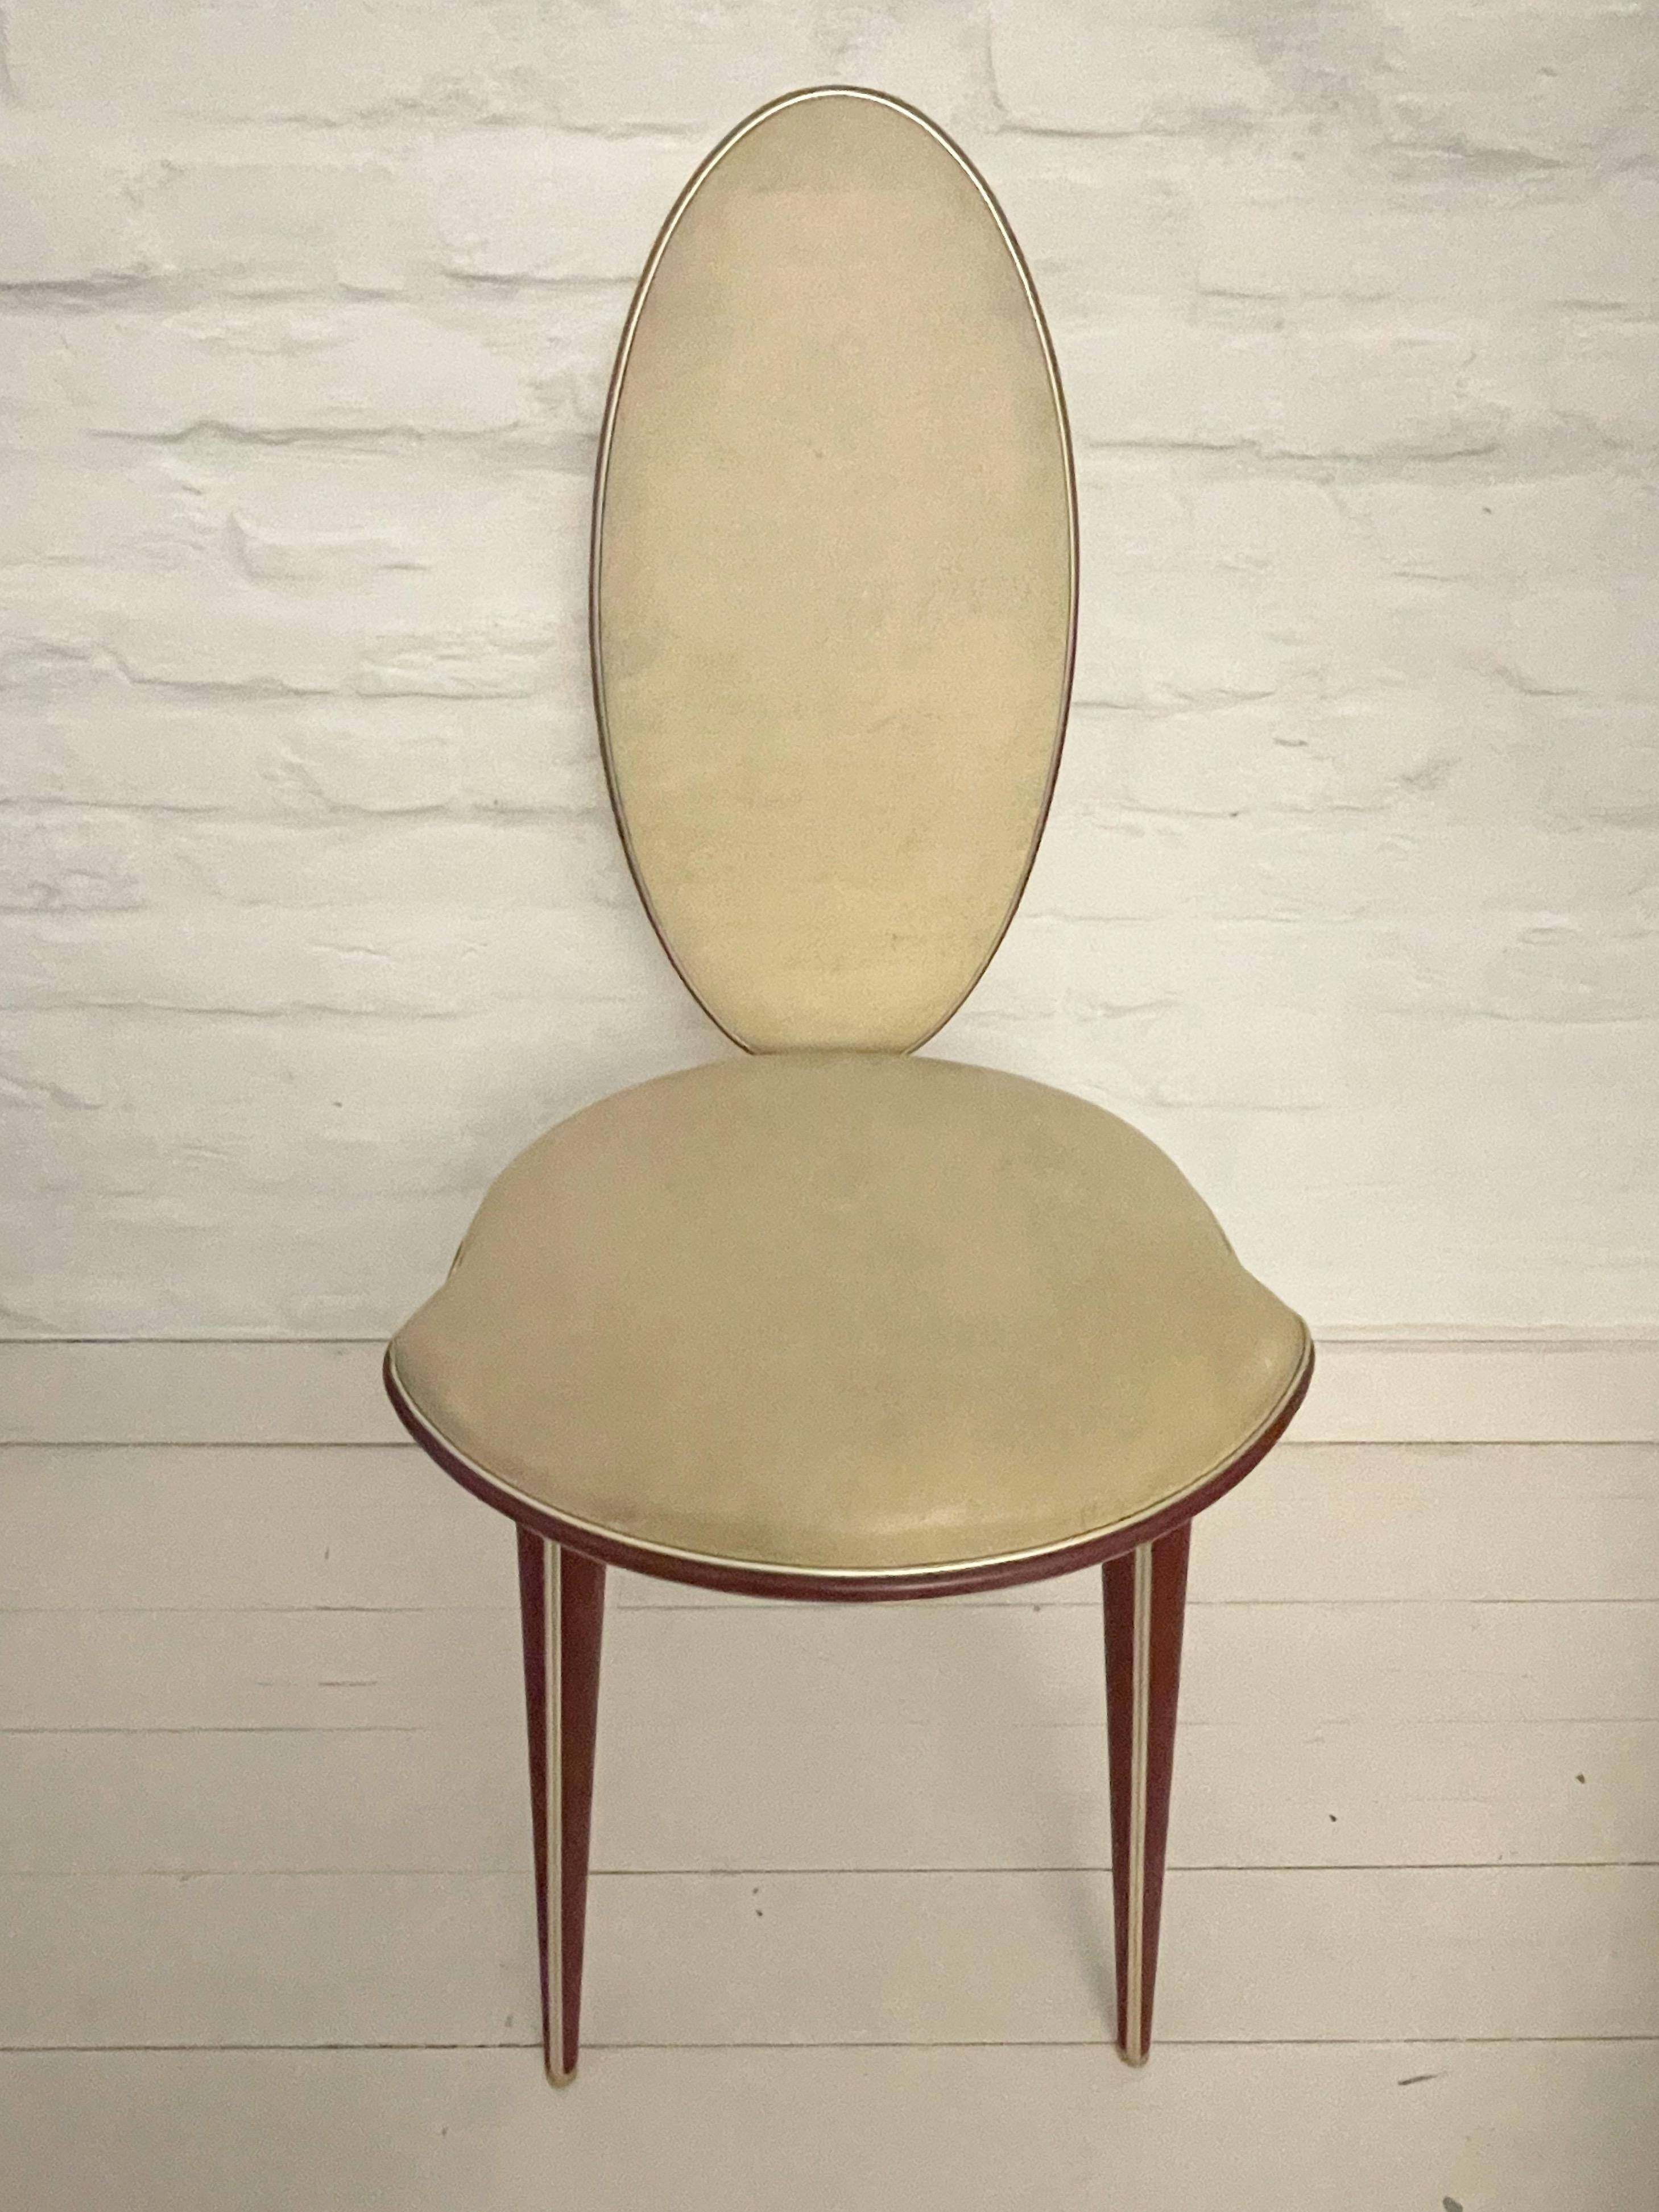 Mid-Century Modern Vintage Italian Chair by Umberto Mascagni for Harrods 1950s